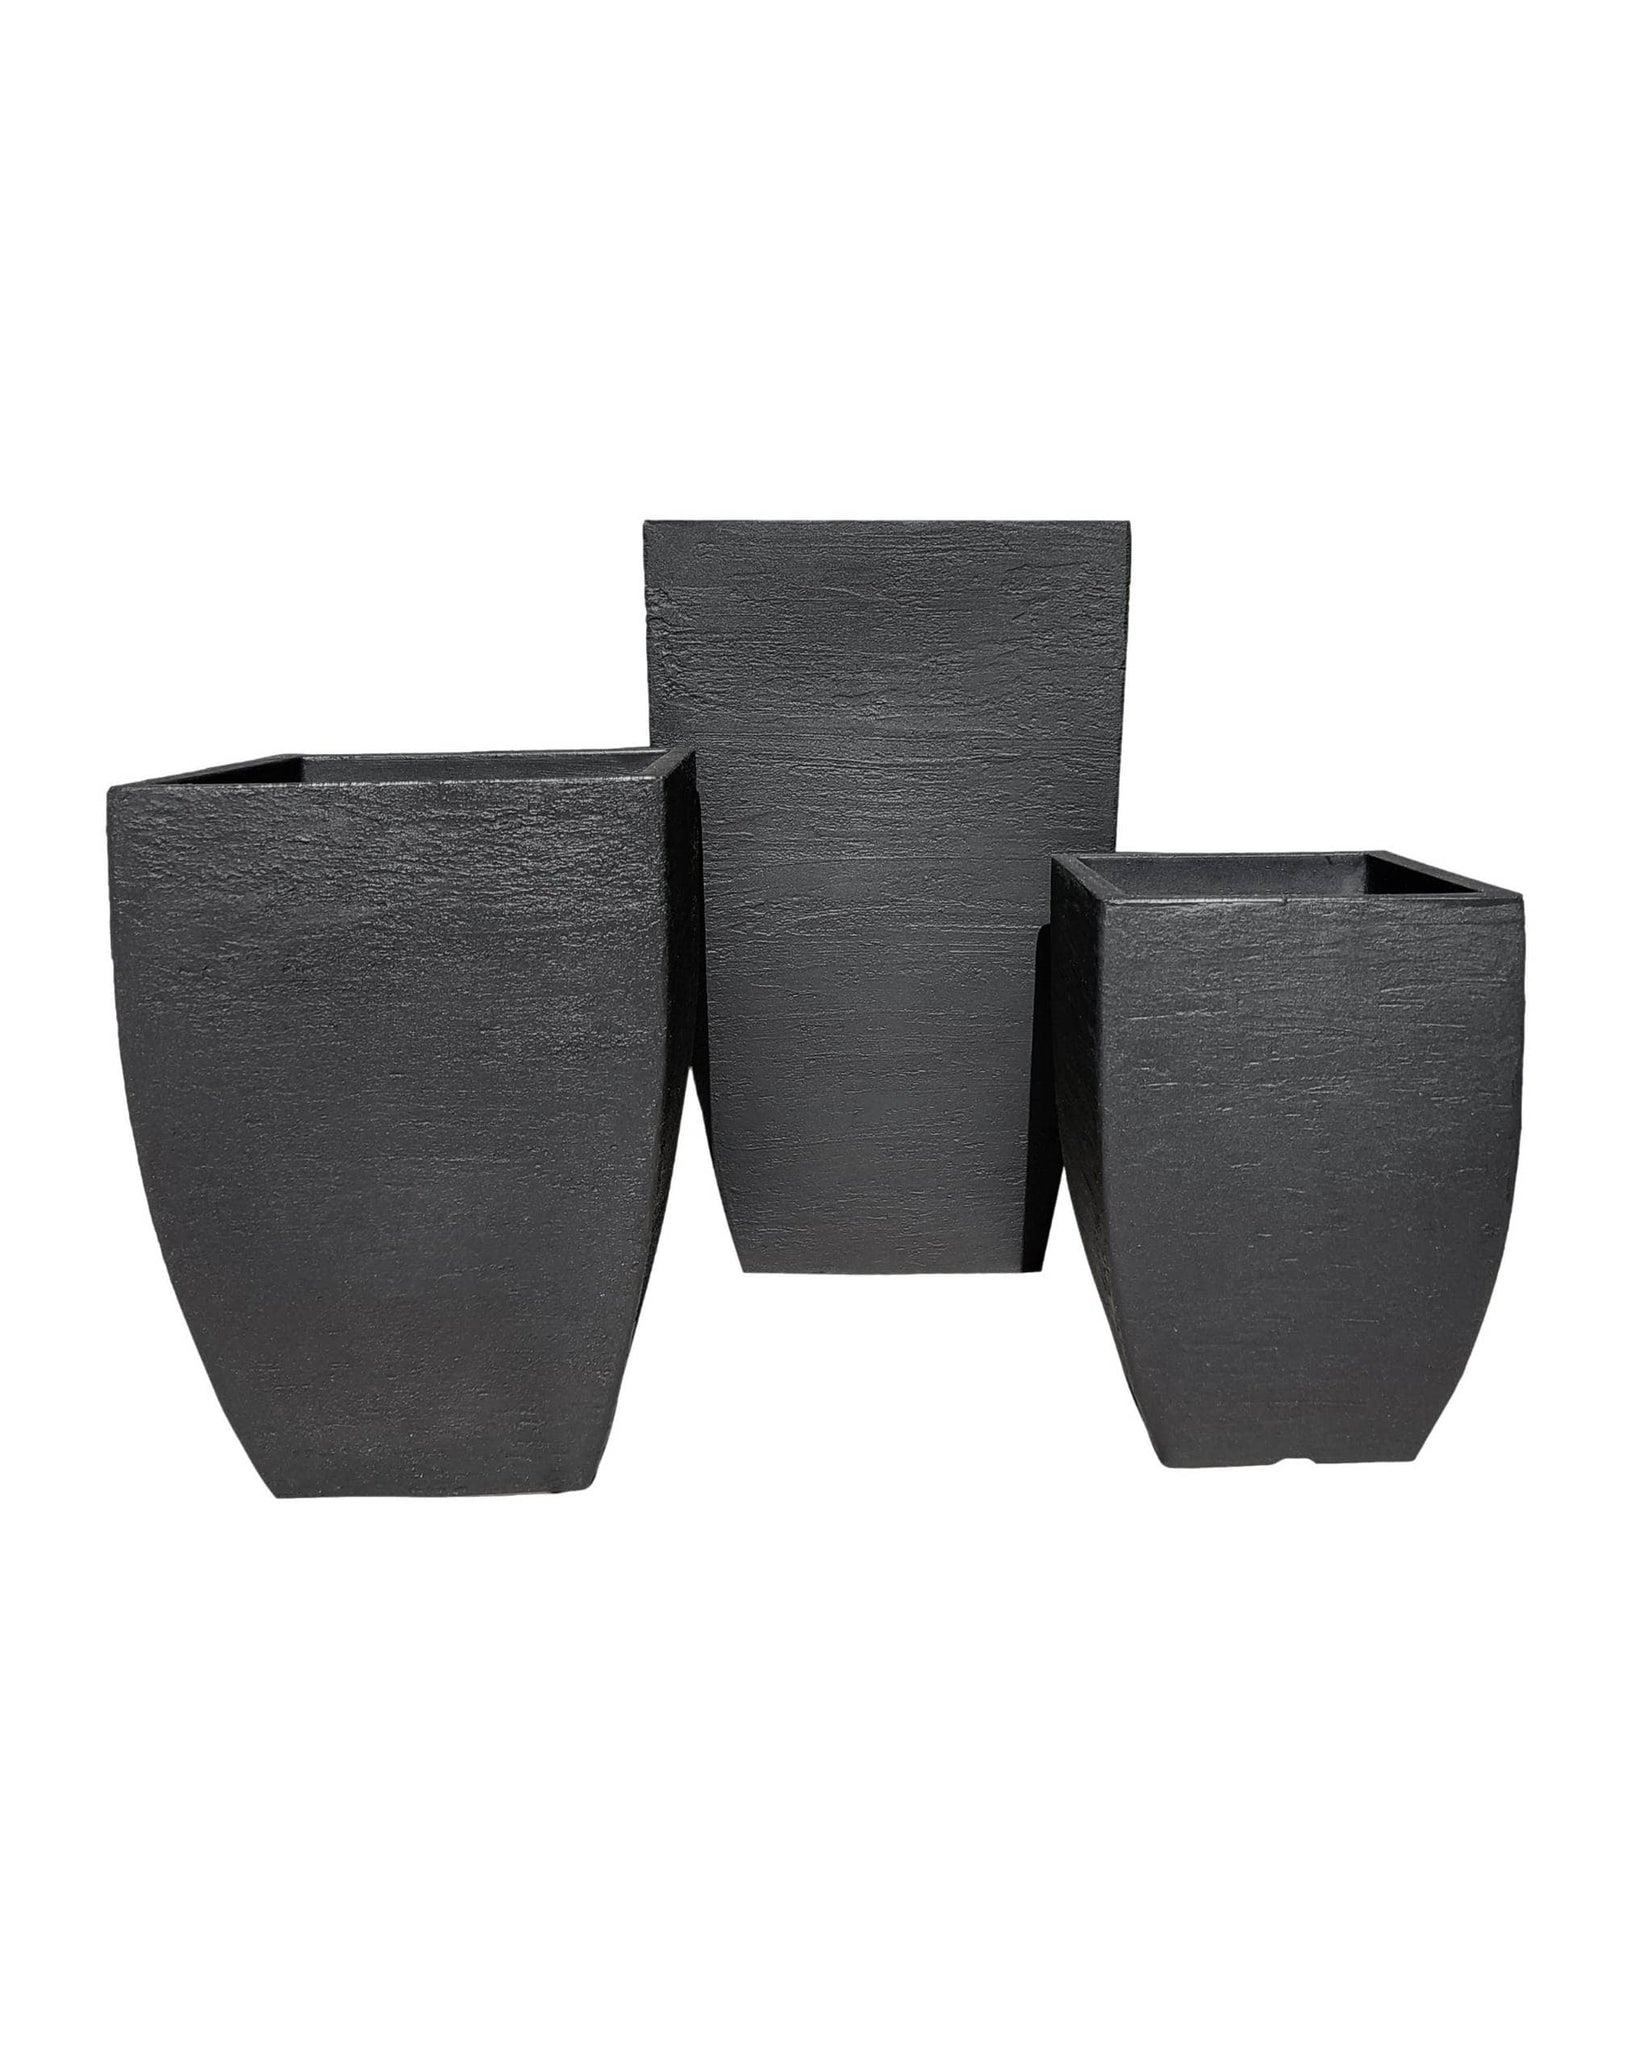 A sophisticated, modern, straight edged planter with clean lines and a textured finish. A perfect planter for the home or office. Great variable sizes. Shown in lead (black)